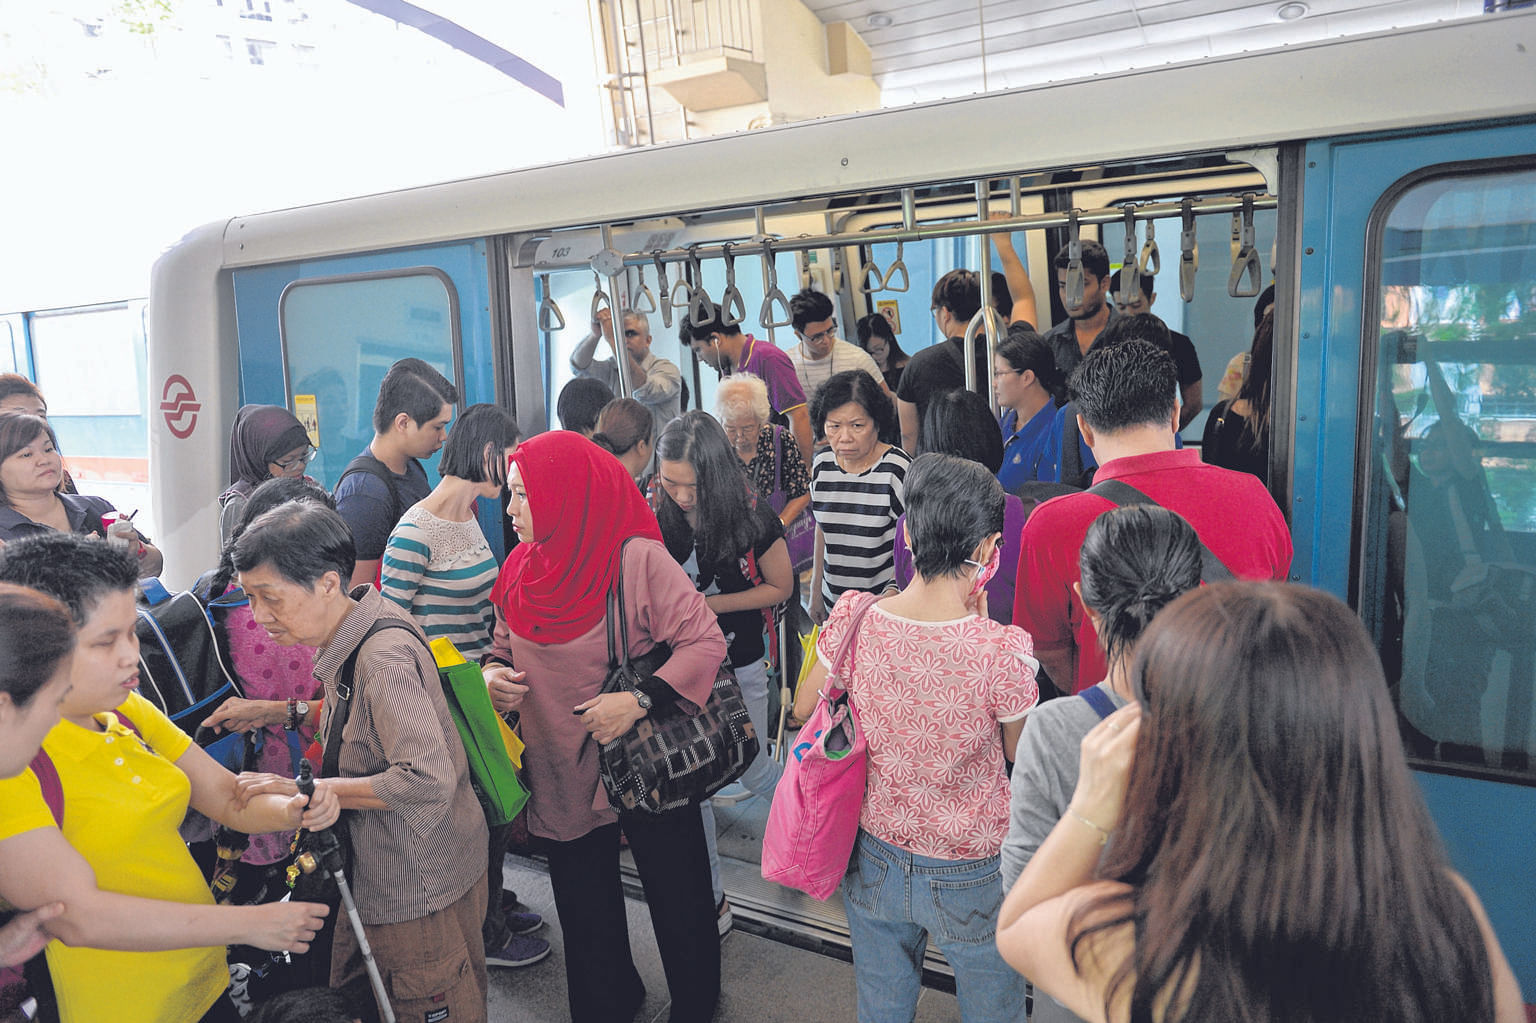 SMRT suspended services on the 17-year-old Bukit Panjang LRT line yesterday to do a thorough check.